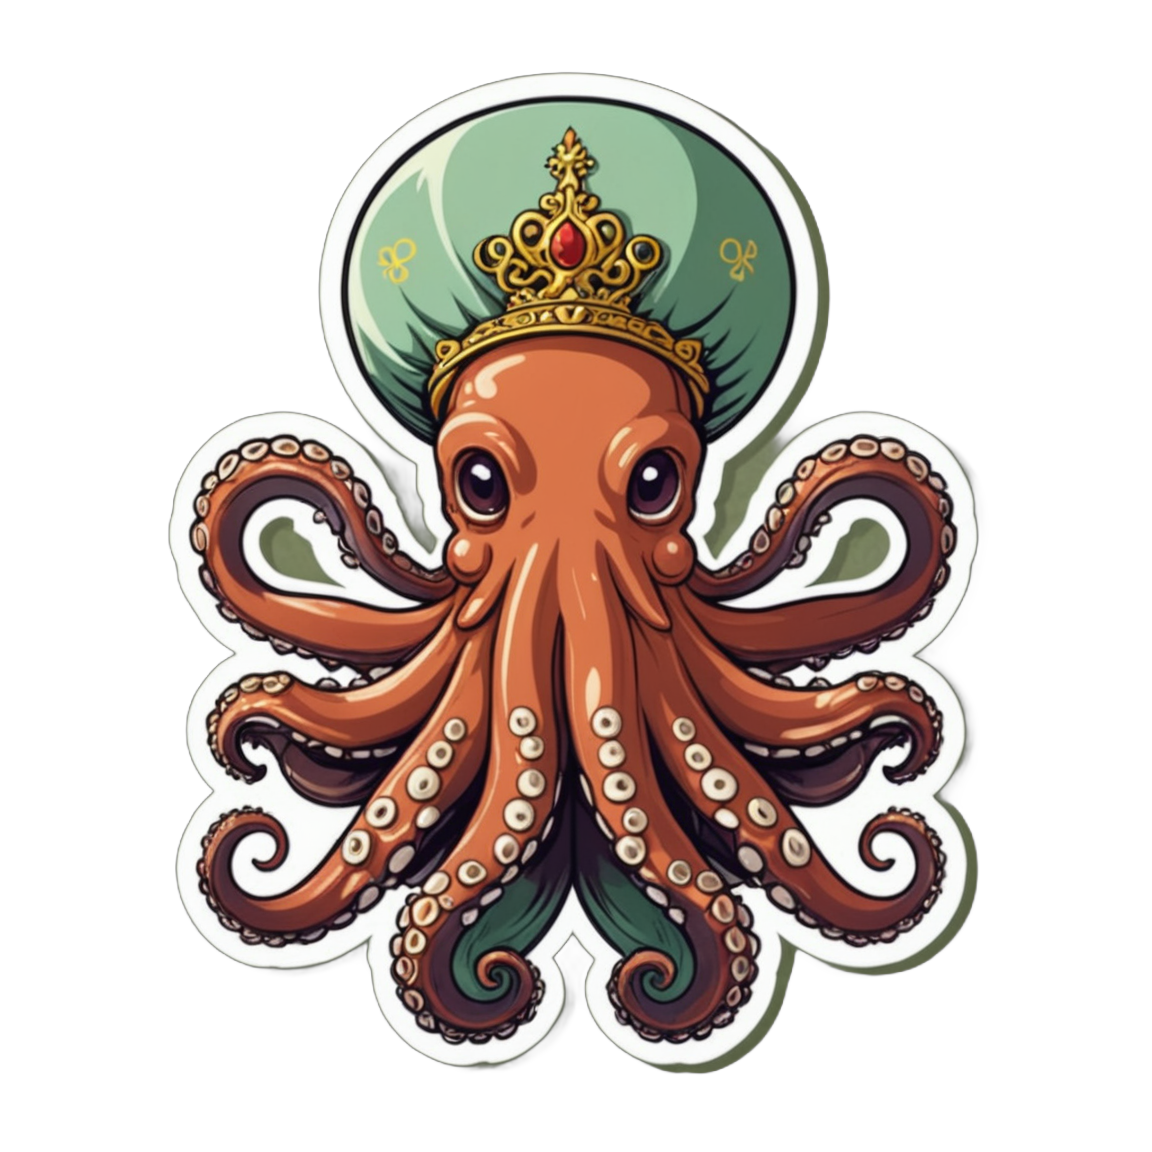 An octopus with an teal colored turban, nobility embodied in its regal tentacle gestures and ornate attire